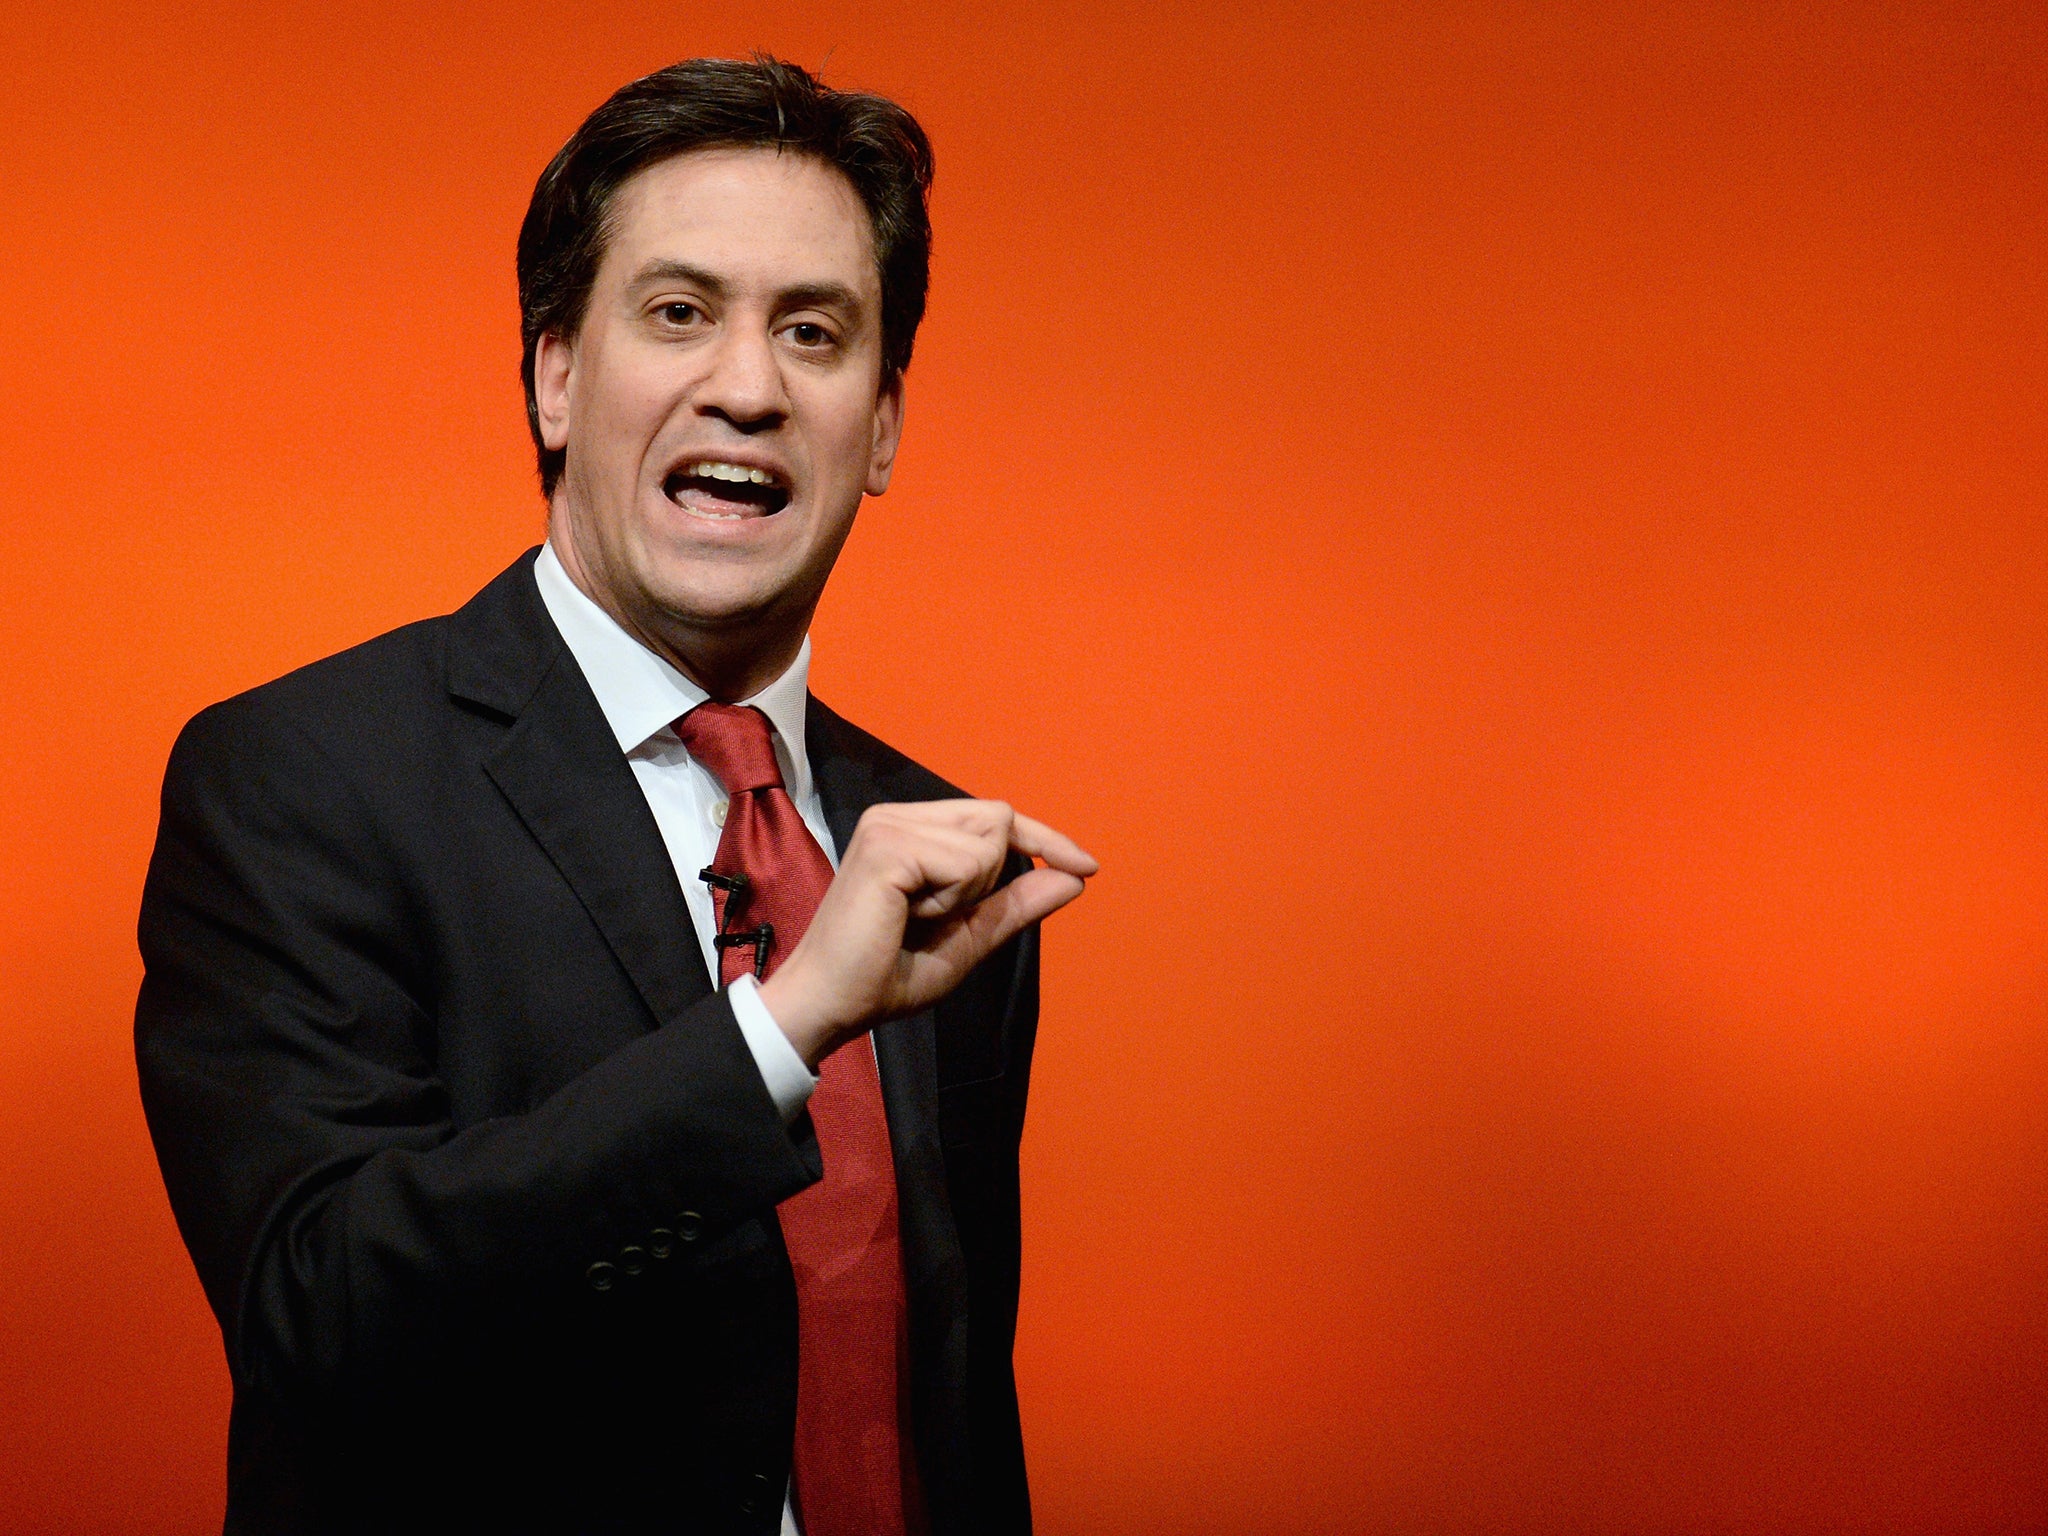 Ed Miliband has said that the UK "needs stronger controls on people coming here”